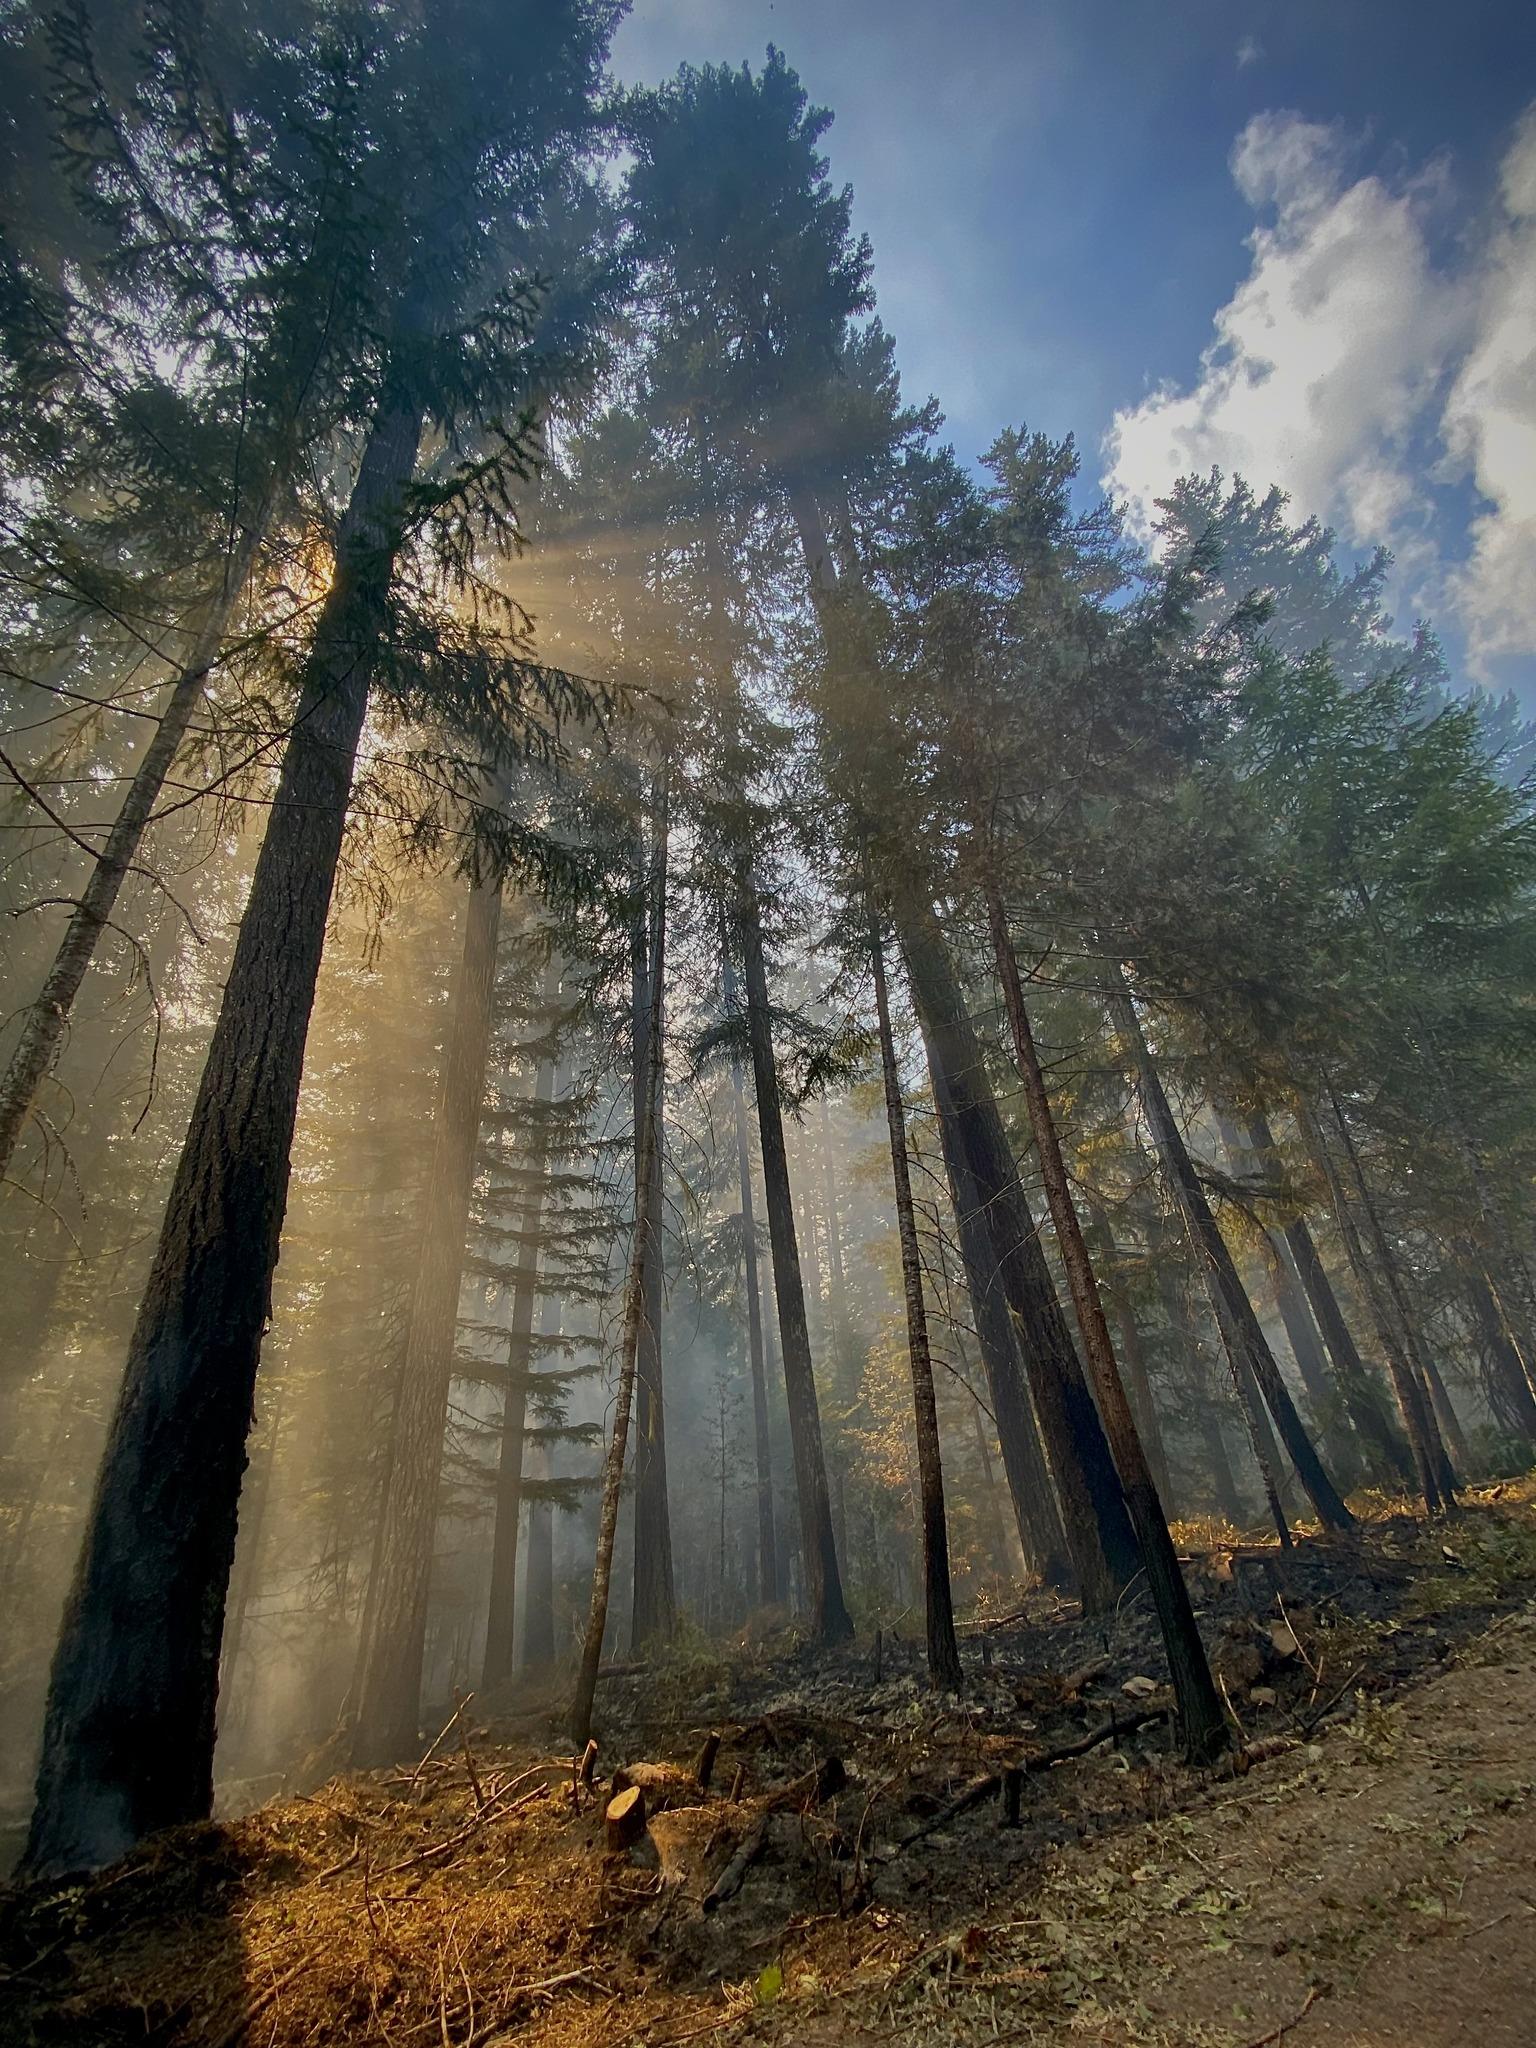 This is an image of smoke in the trees accentuated by sunlight